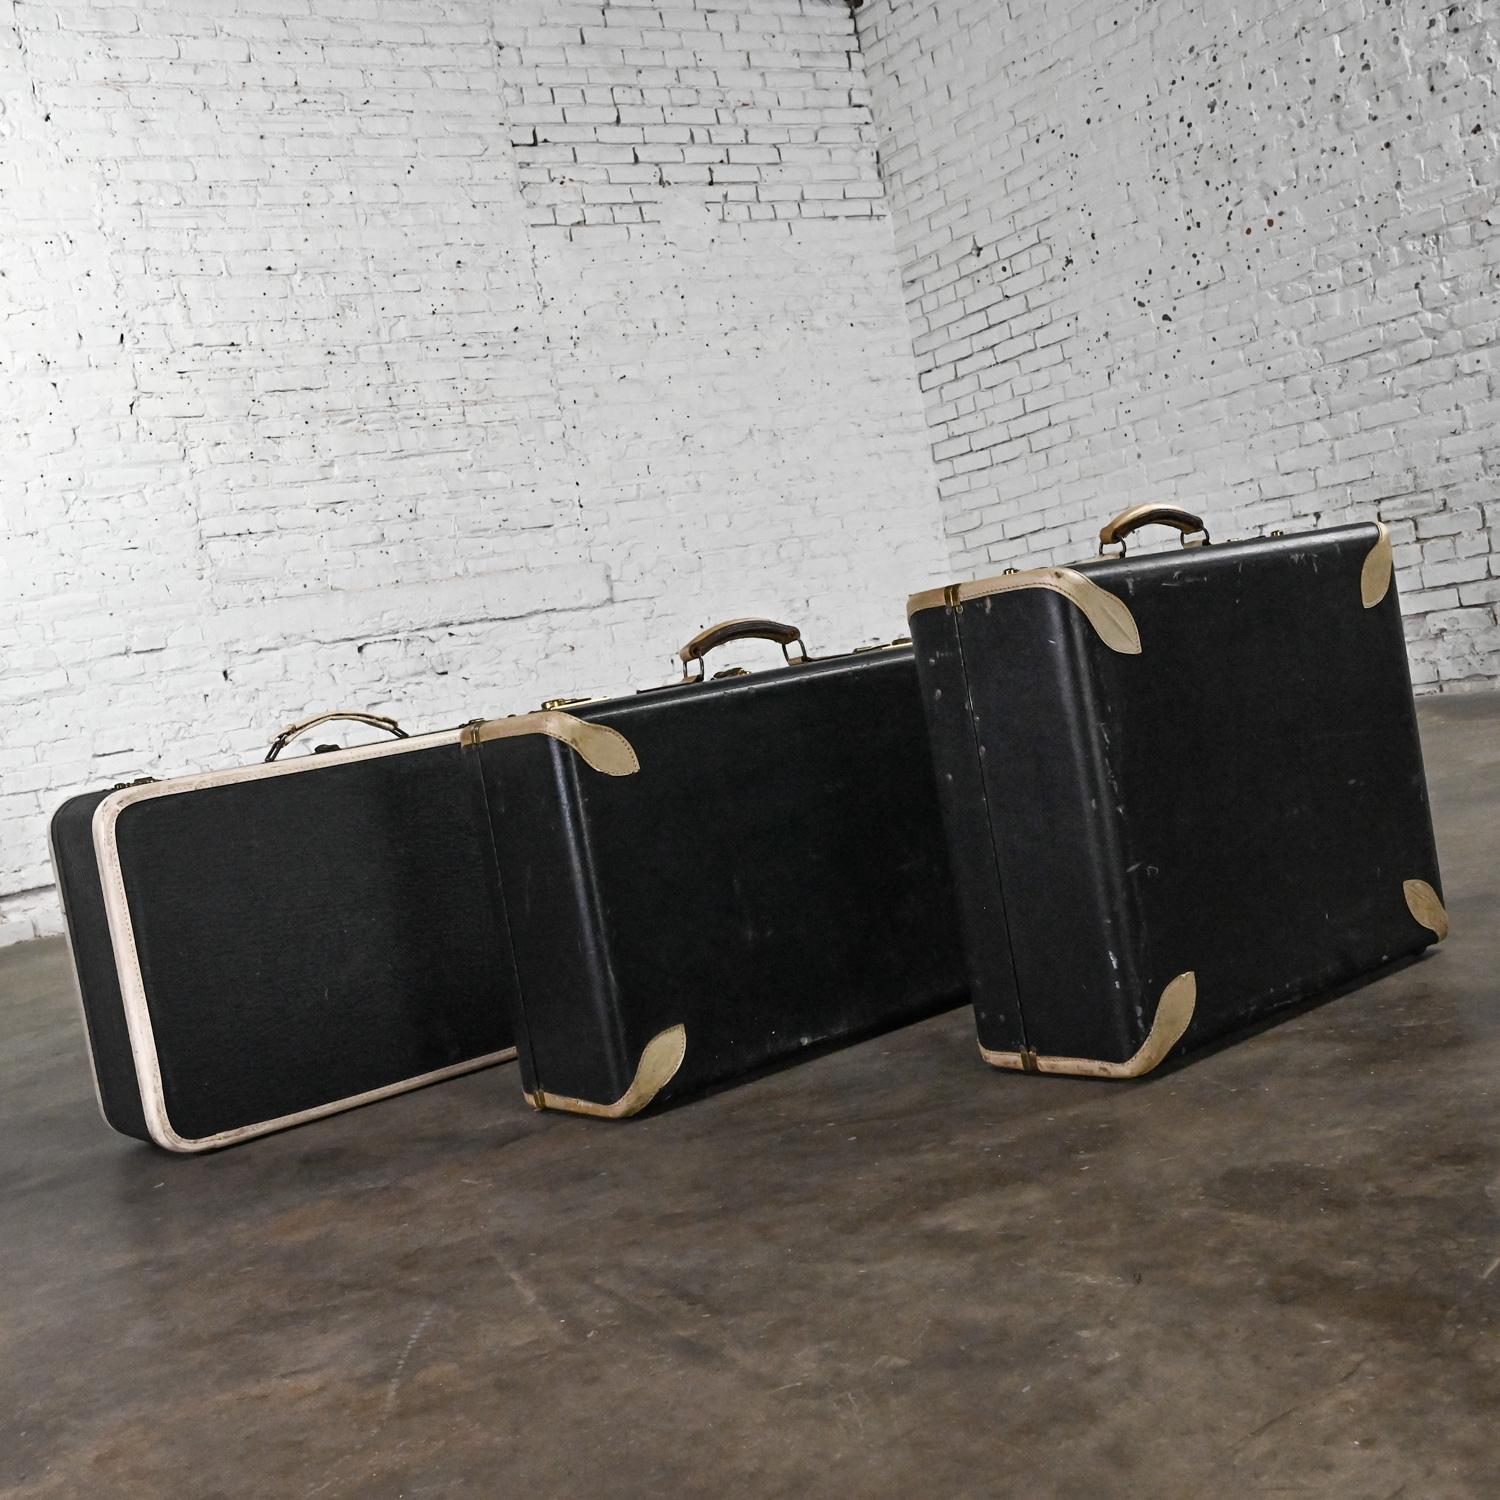 Leather Mid Century Boho Chic Luggage End or Side Tables or Décor Black & White 3 Pieces